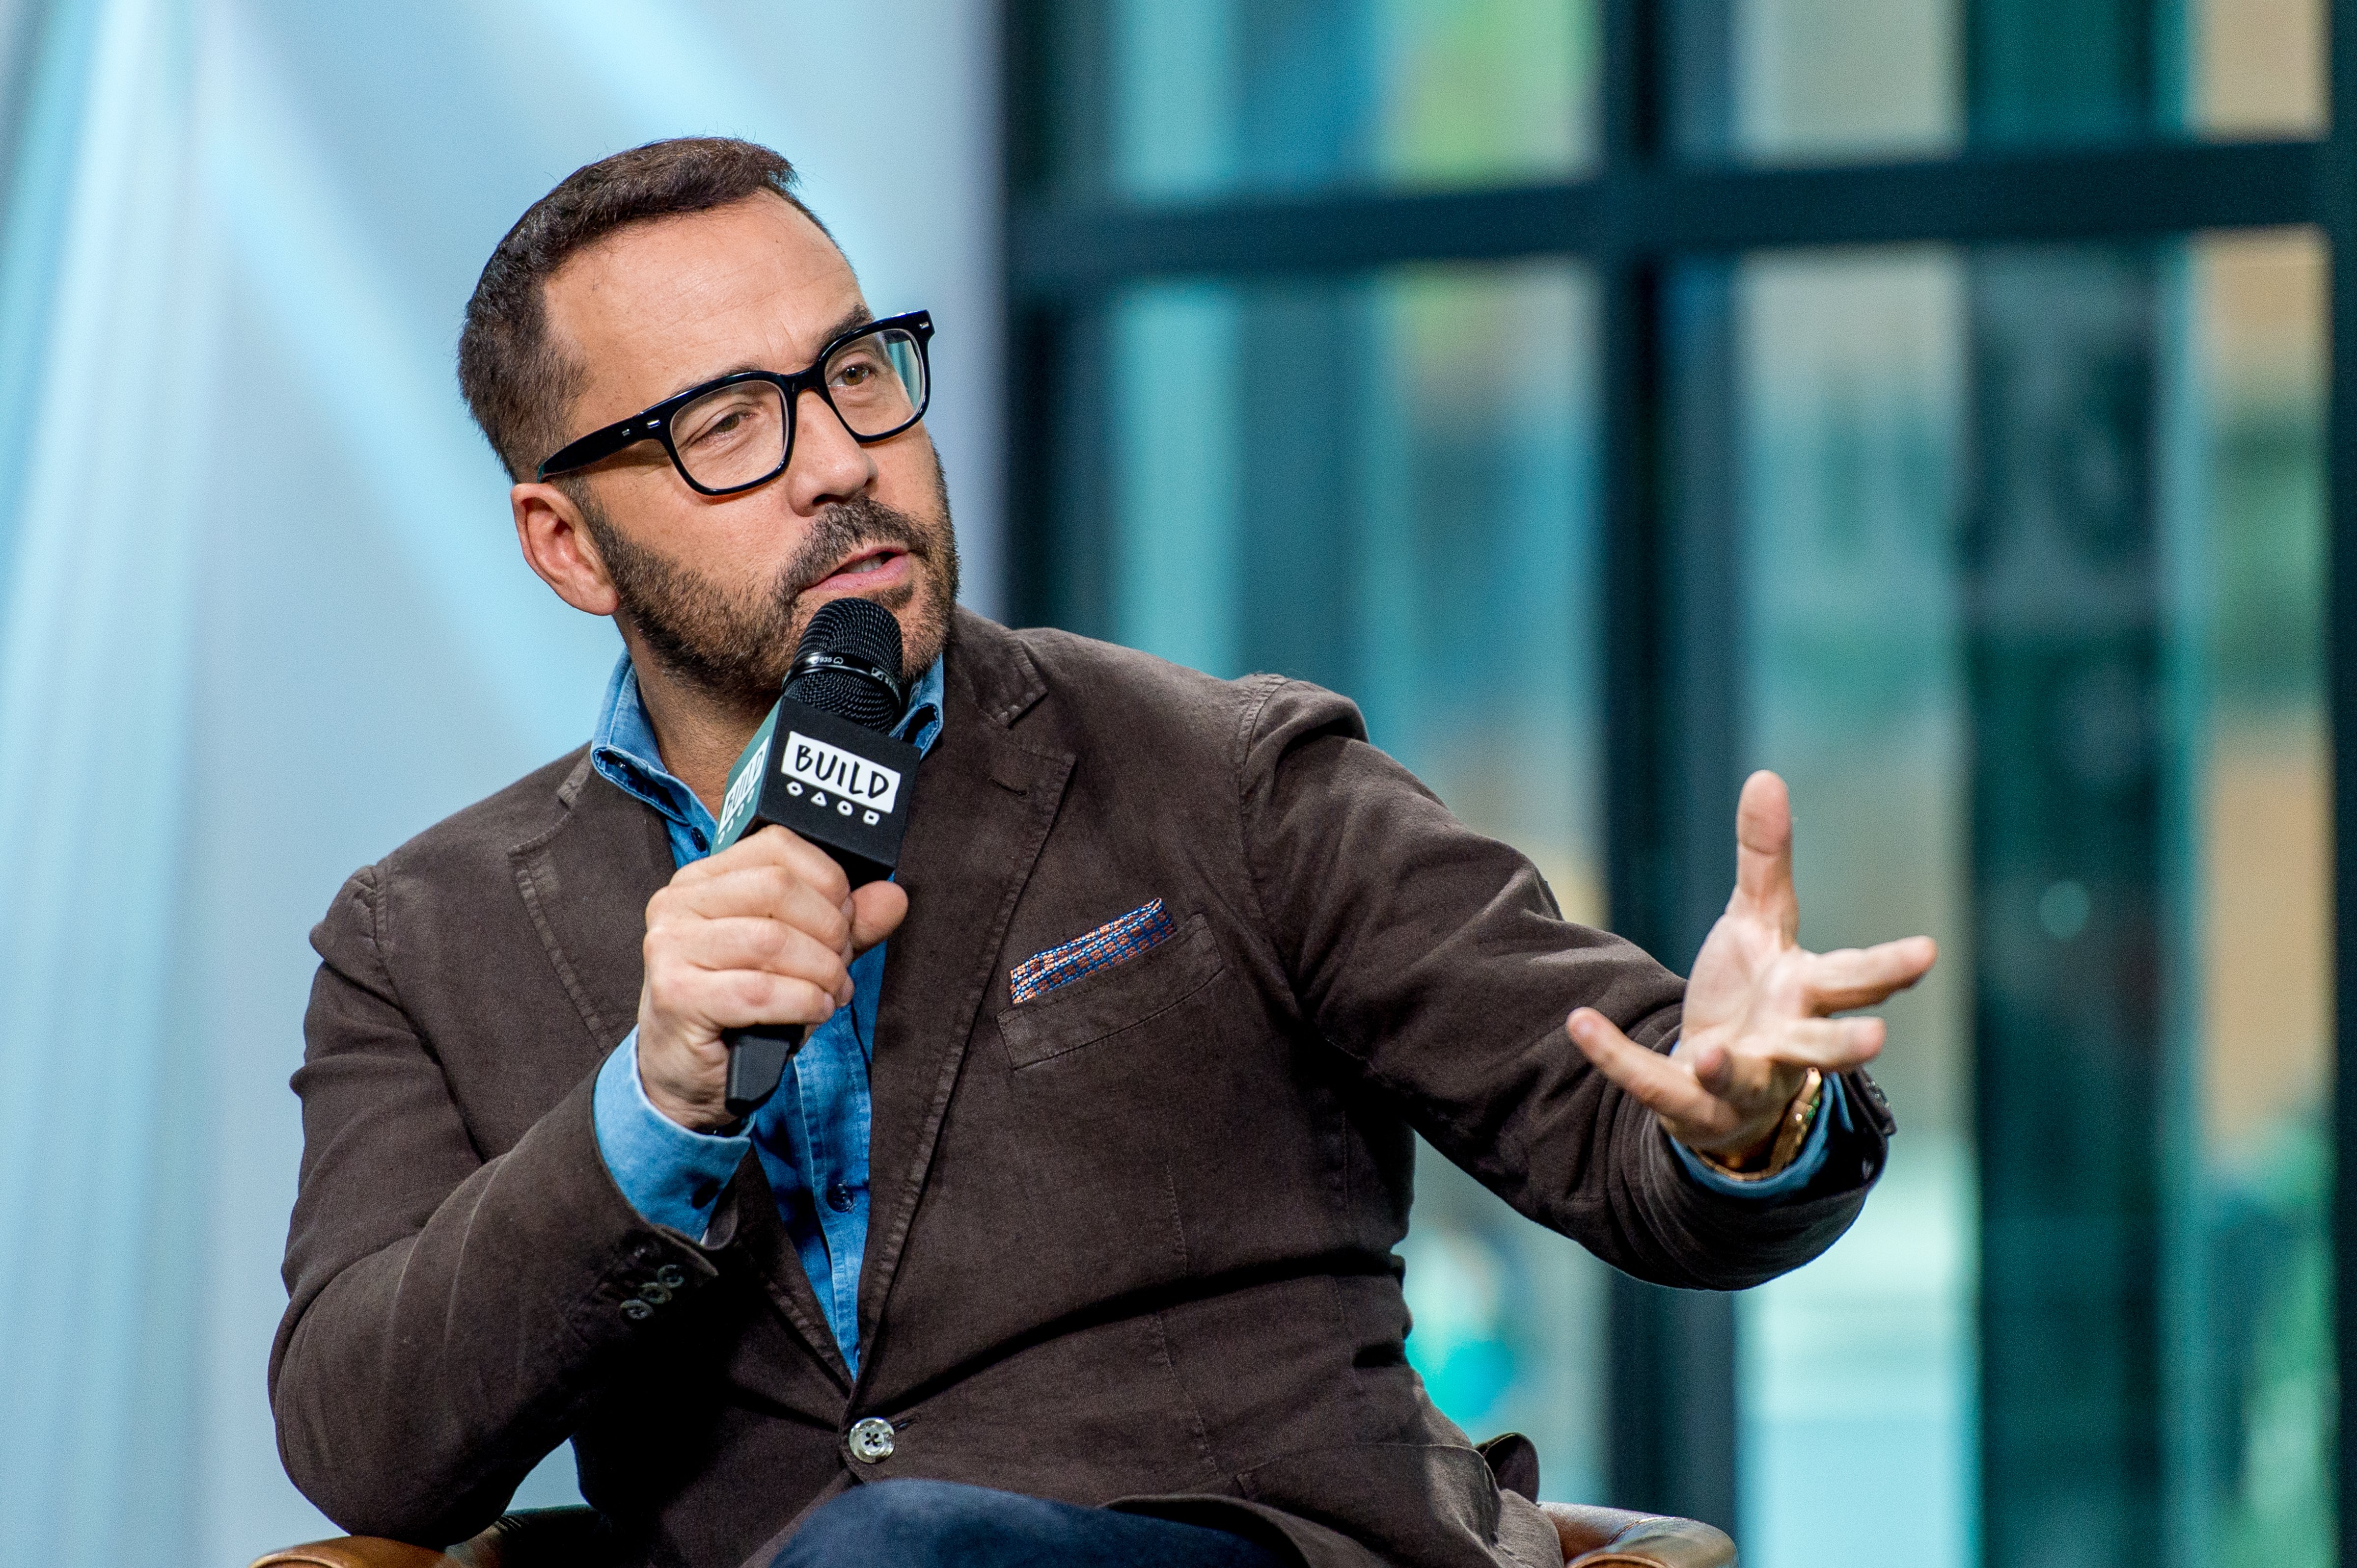 Jeremy Piven discusses "Wisdom Of The Crowd" with the Build Series at Build Studio in New York City on Oct. 31, 2017. (Roy Rochlin—FilmMagic)